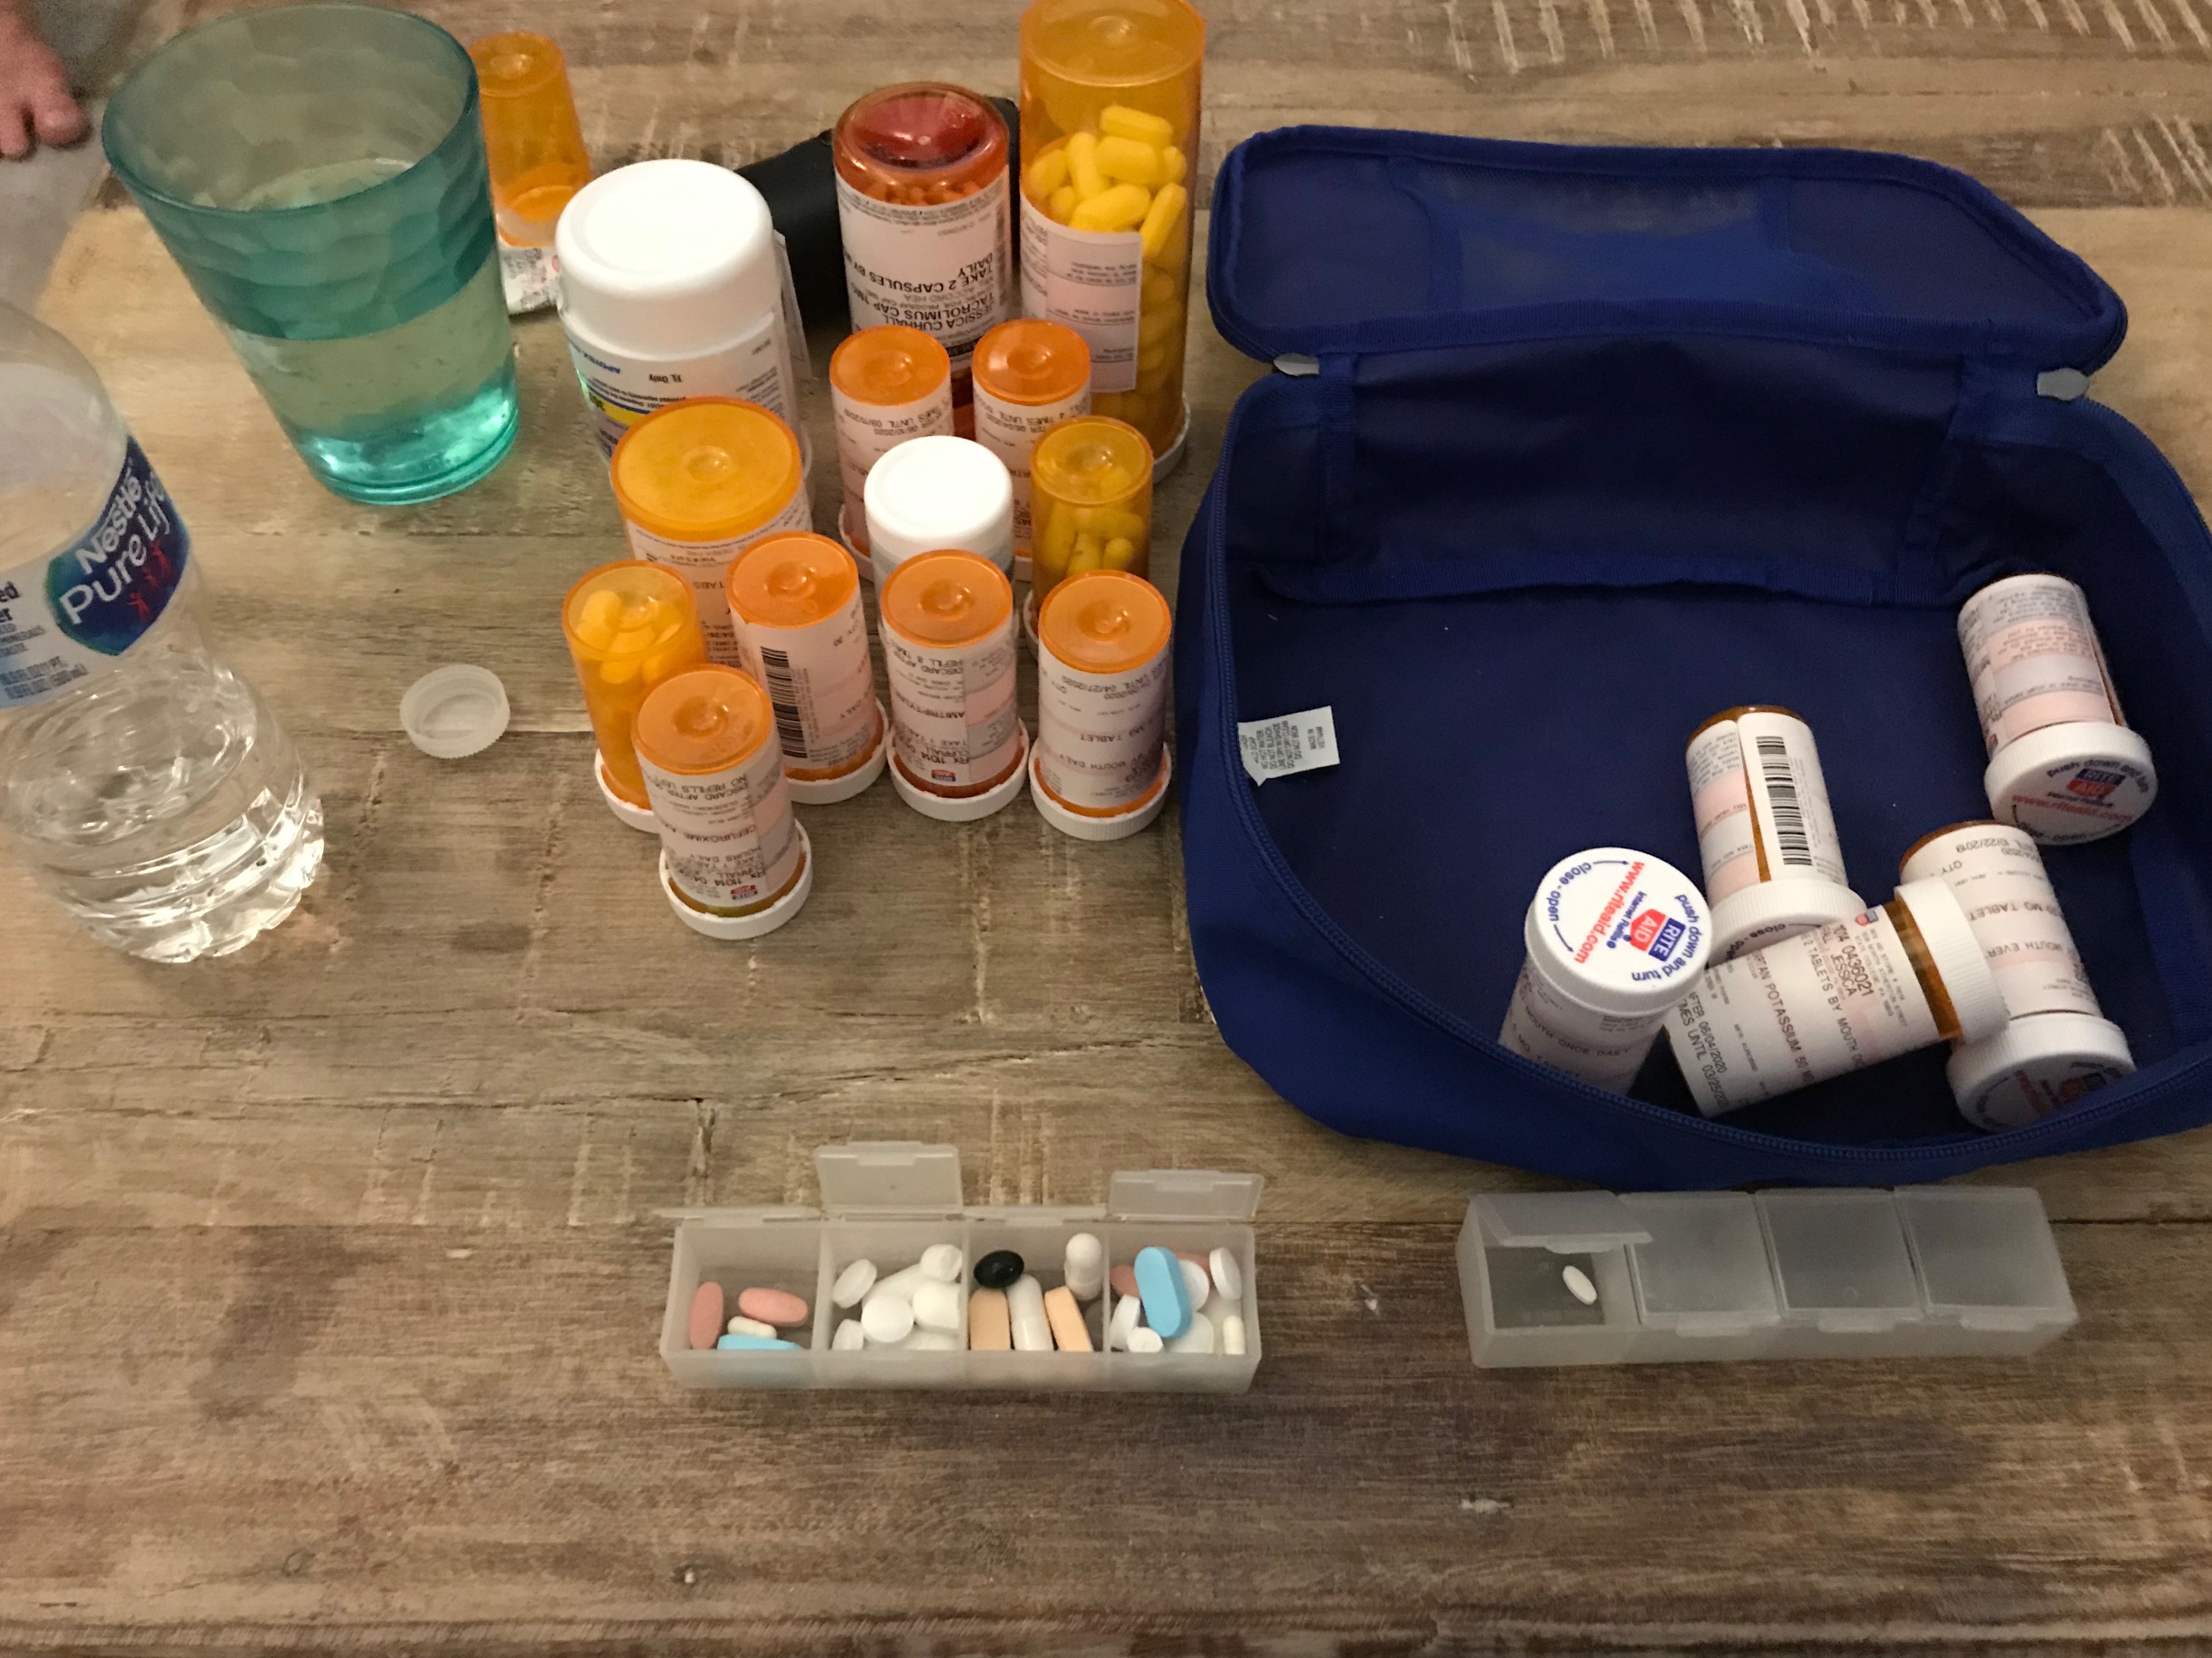 Table view of prescription medications in bottles and in a travel bag